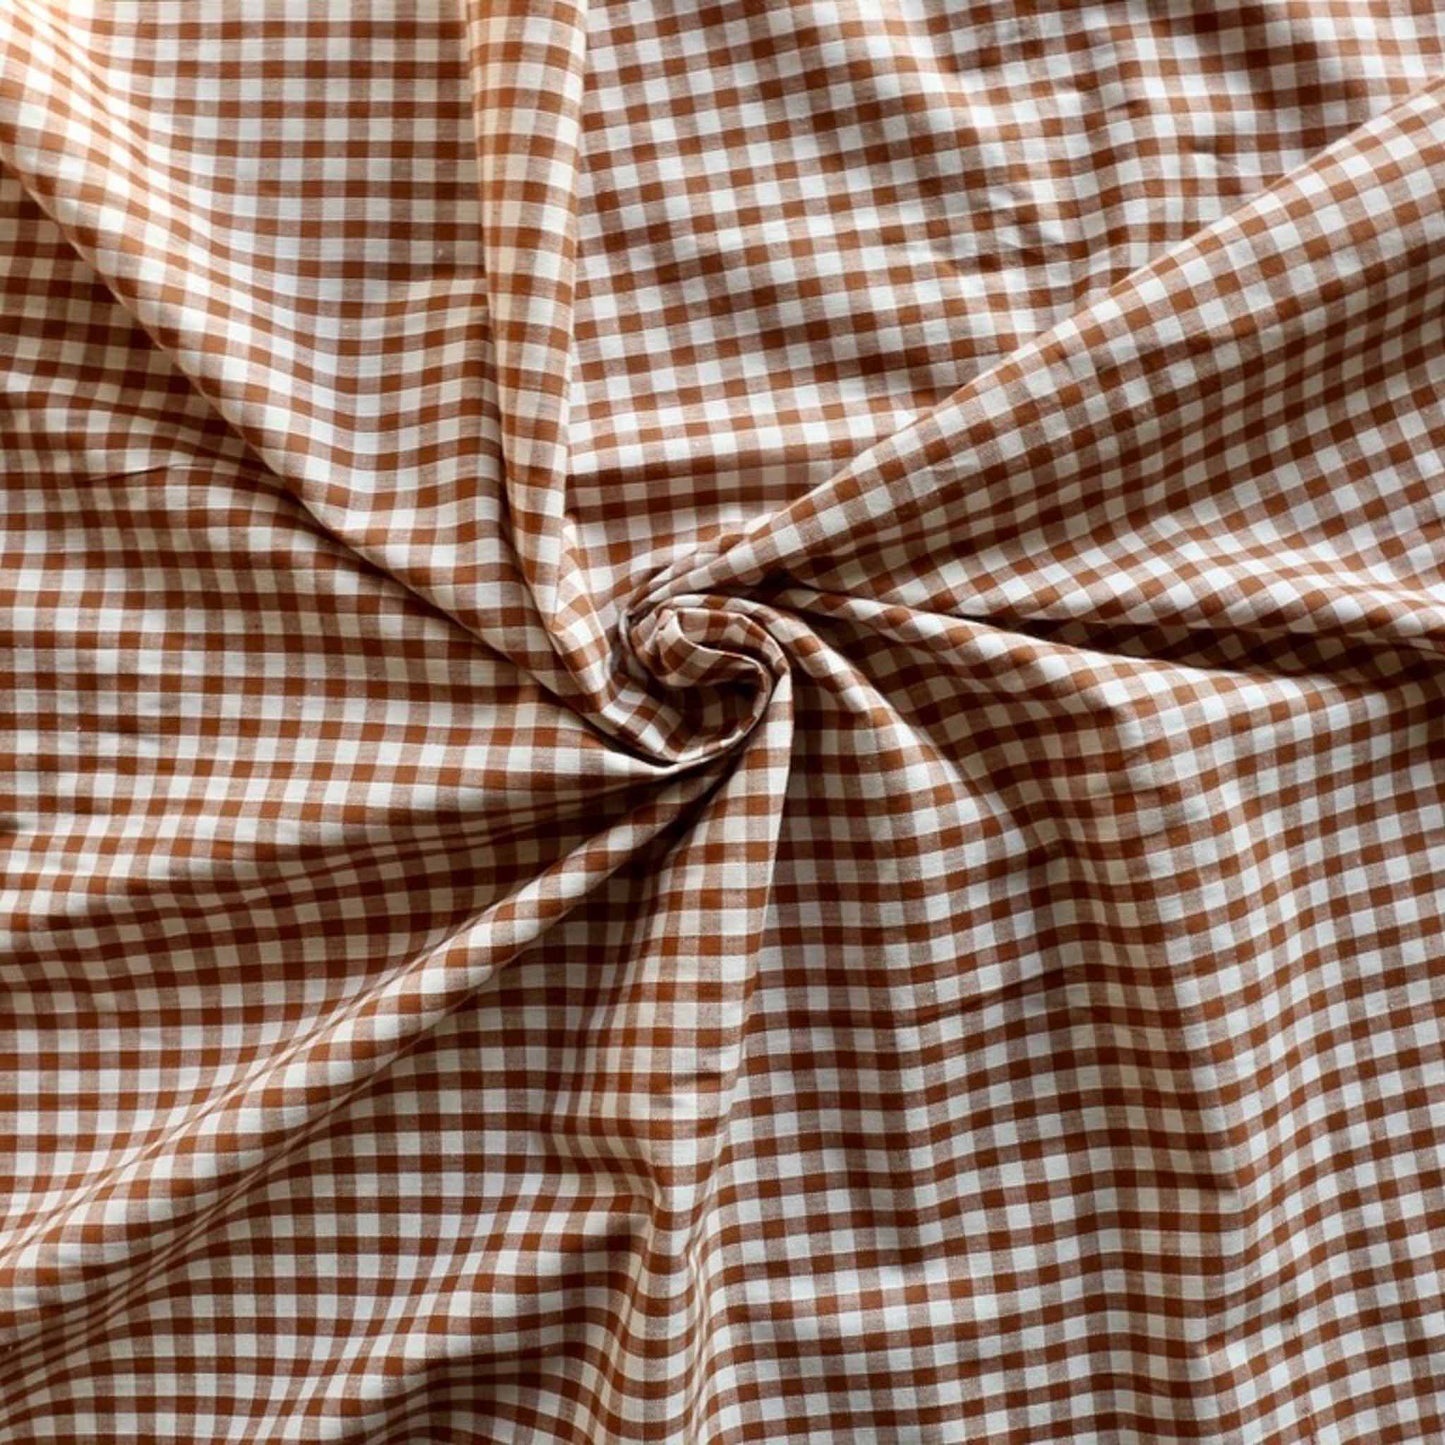 sustainable vintage cotton dressmaking fabric with brown and beige gingham print